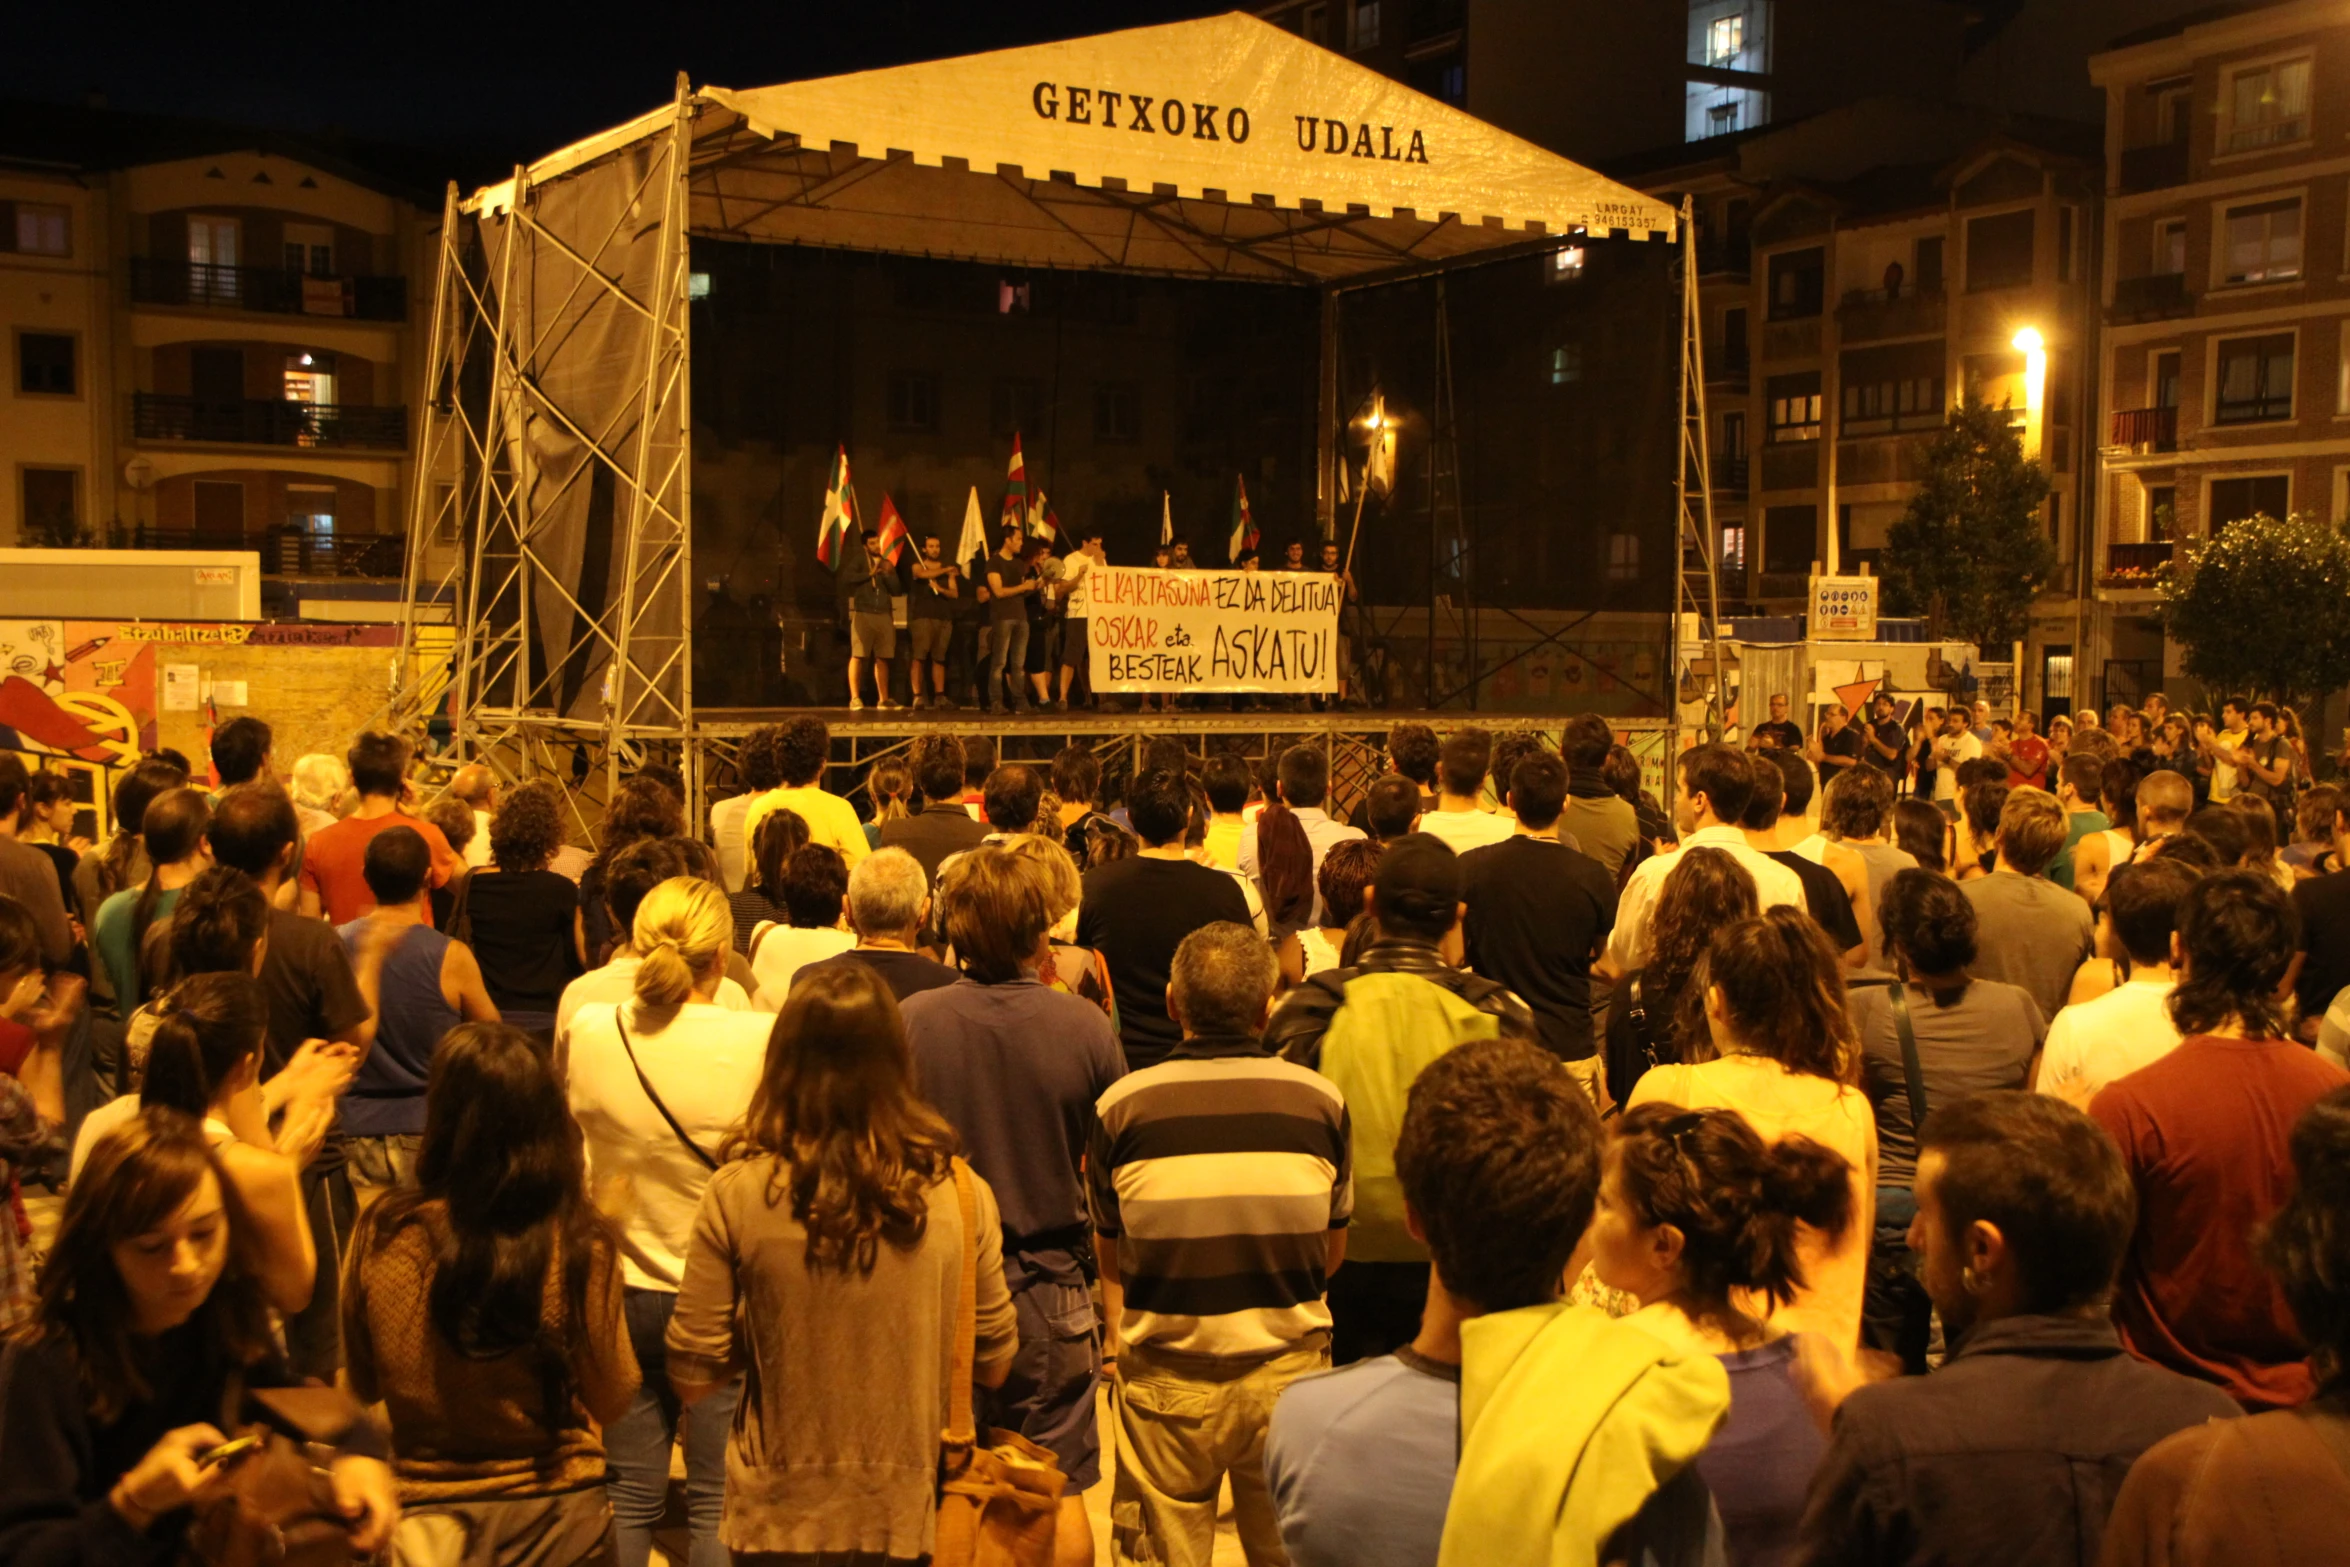 a large crowd of people gather at the outdoor stage